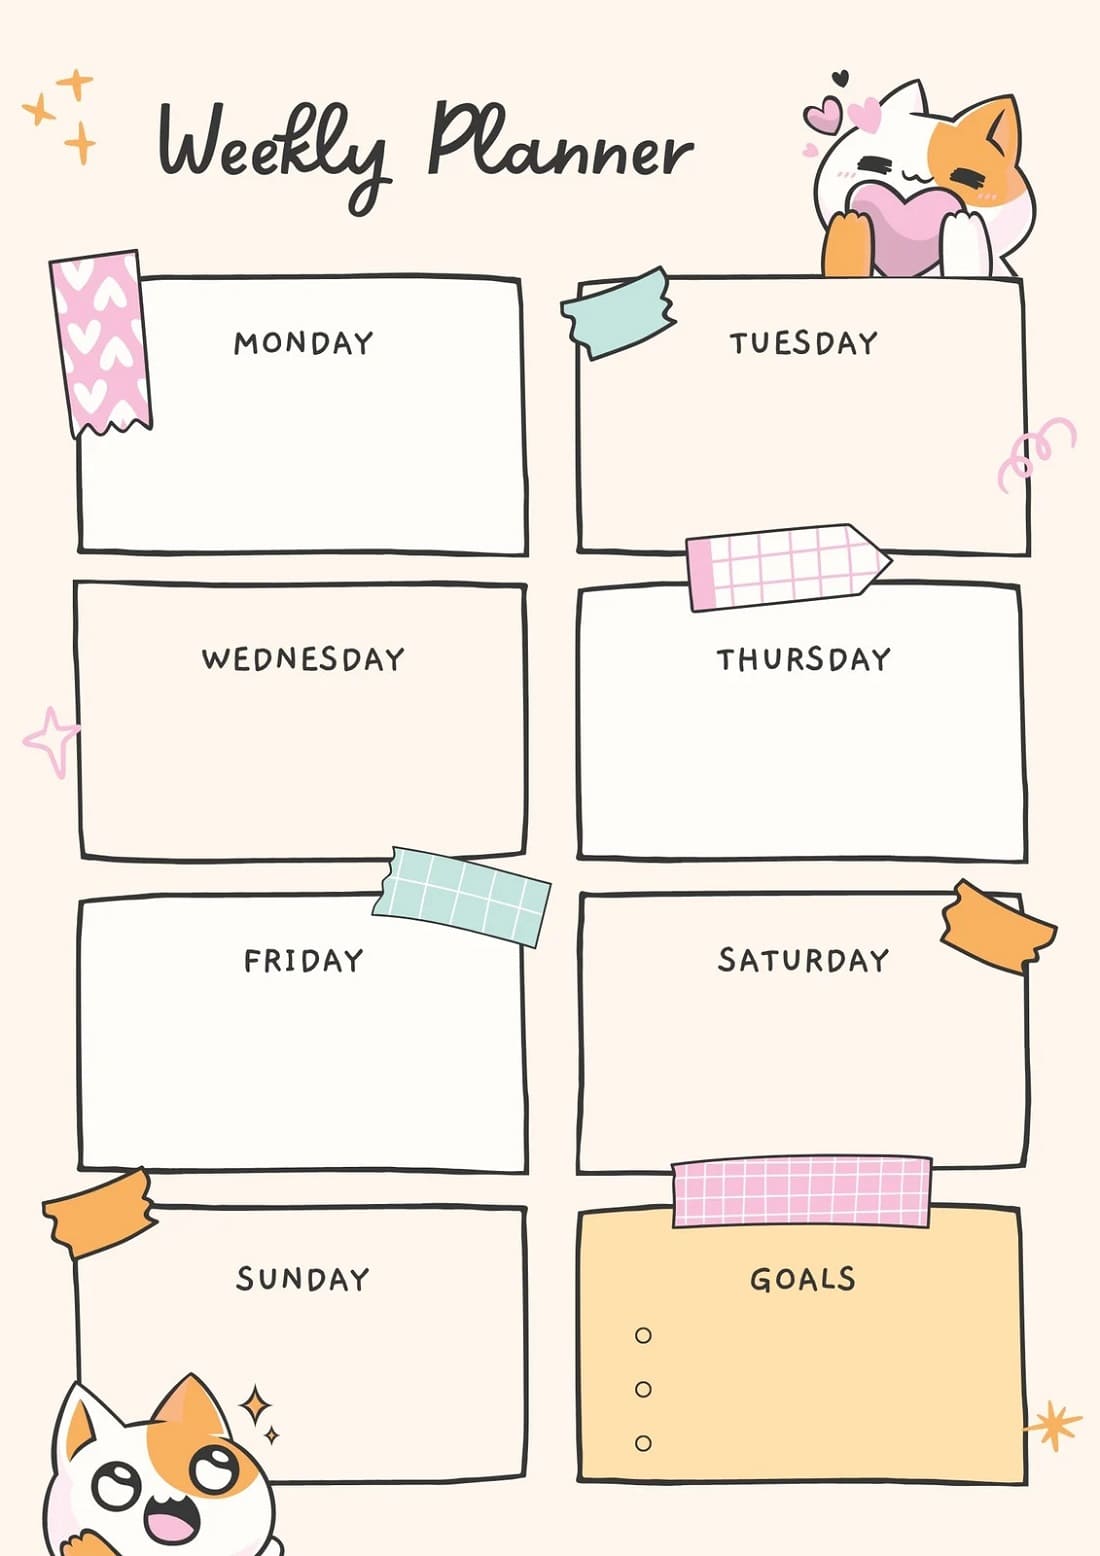 Weekly Schedule Template Image